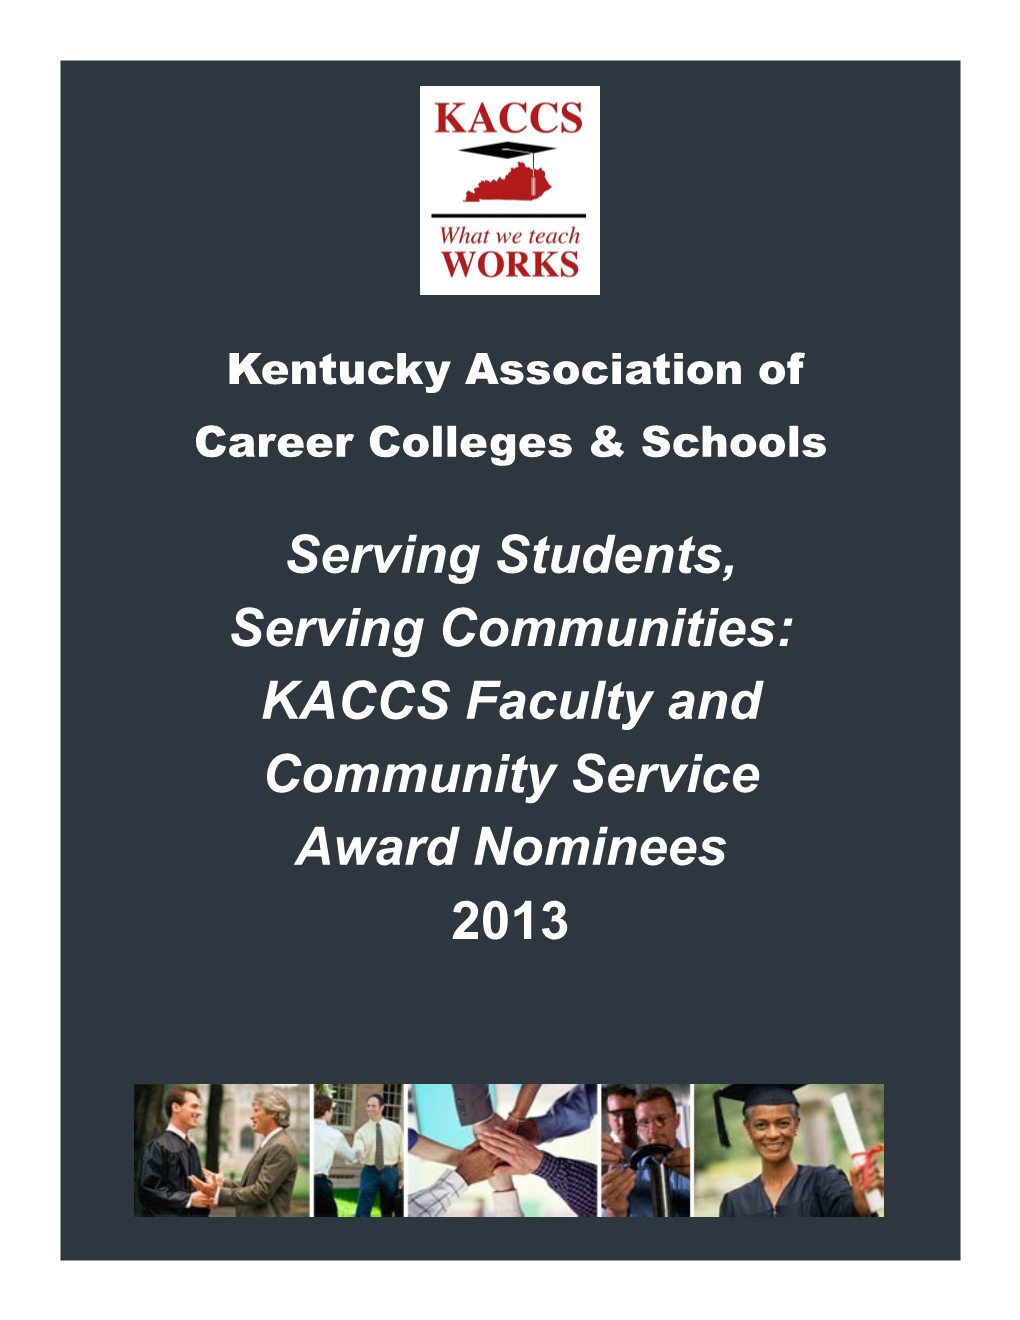 Serving Students, Serving Communities: KACCS Faculty and Community Service Award Nominees 2013